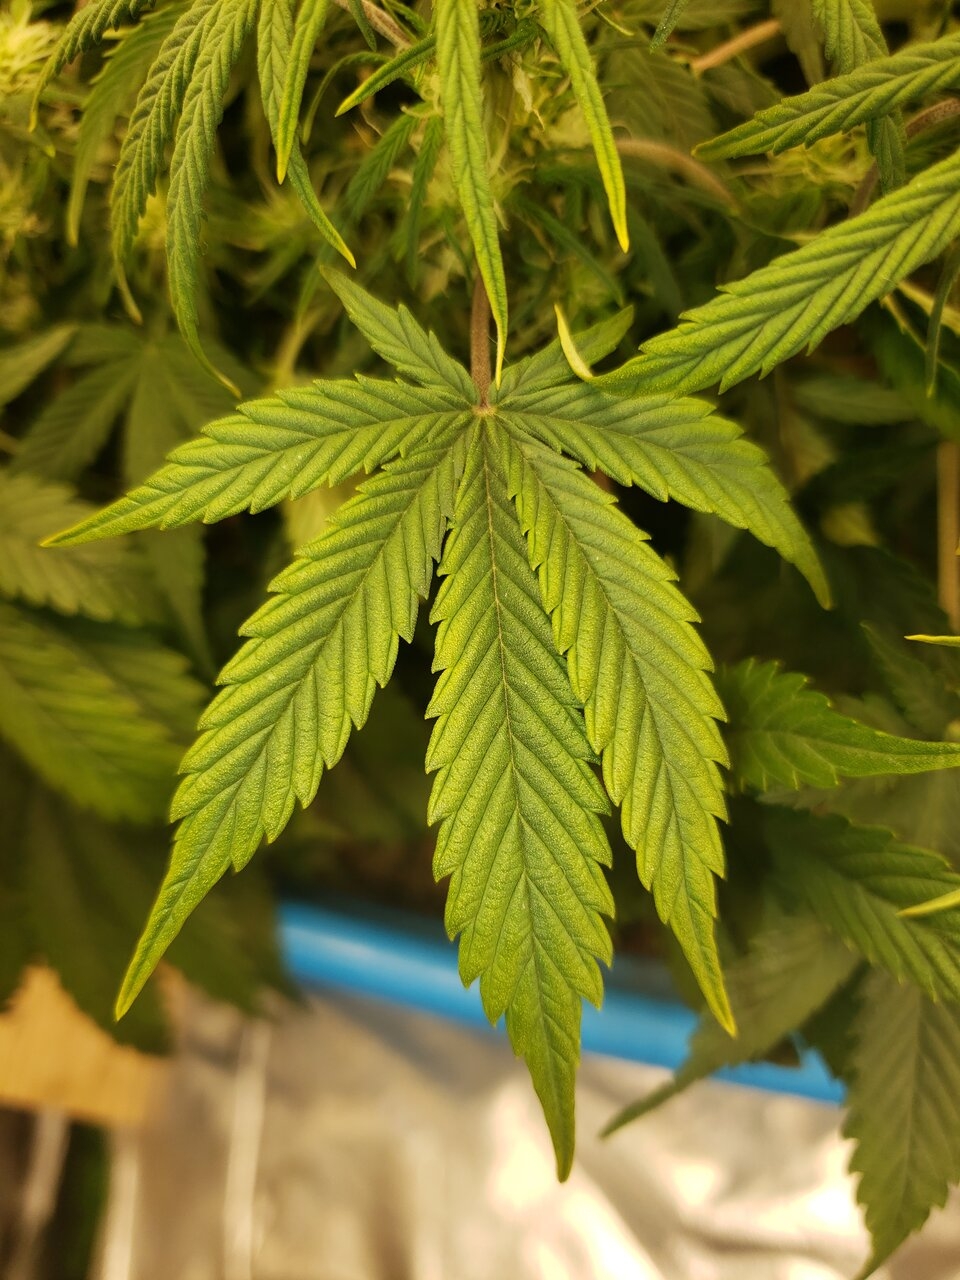 HB Bluedream auto havn slight yellowing on leaves